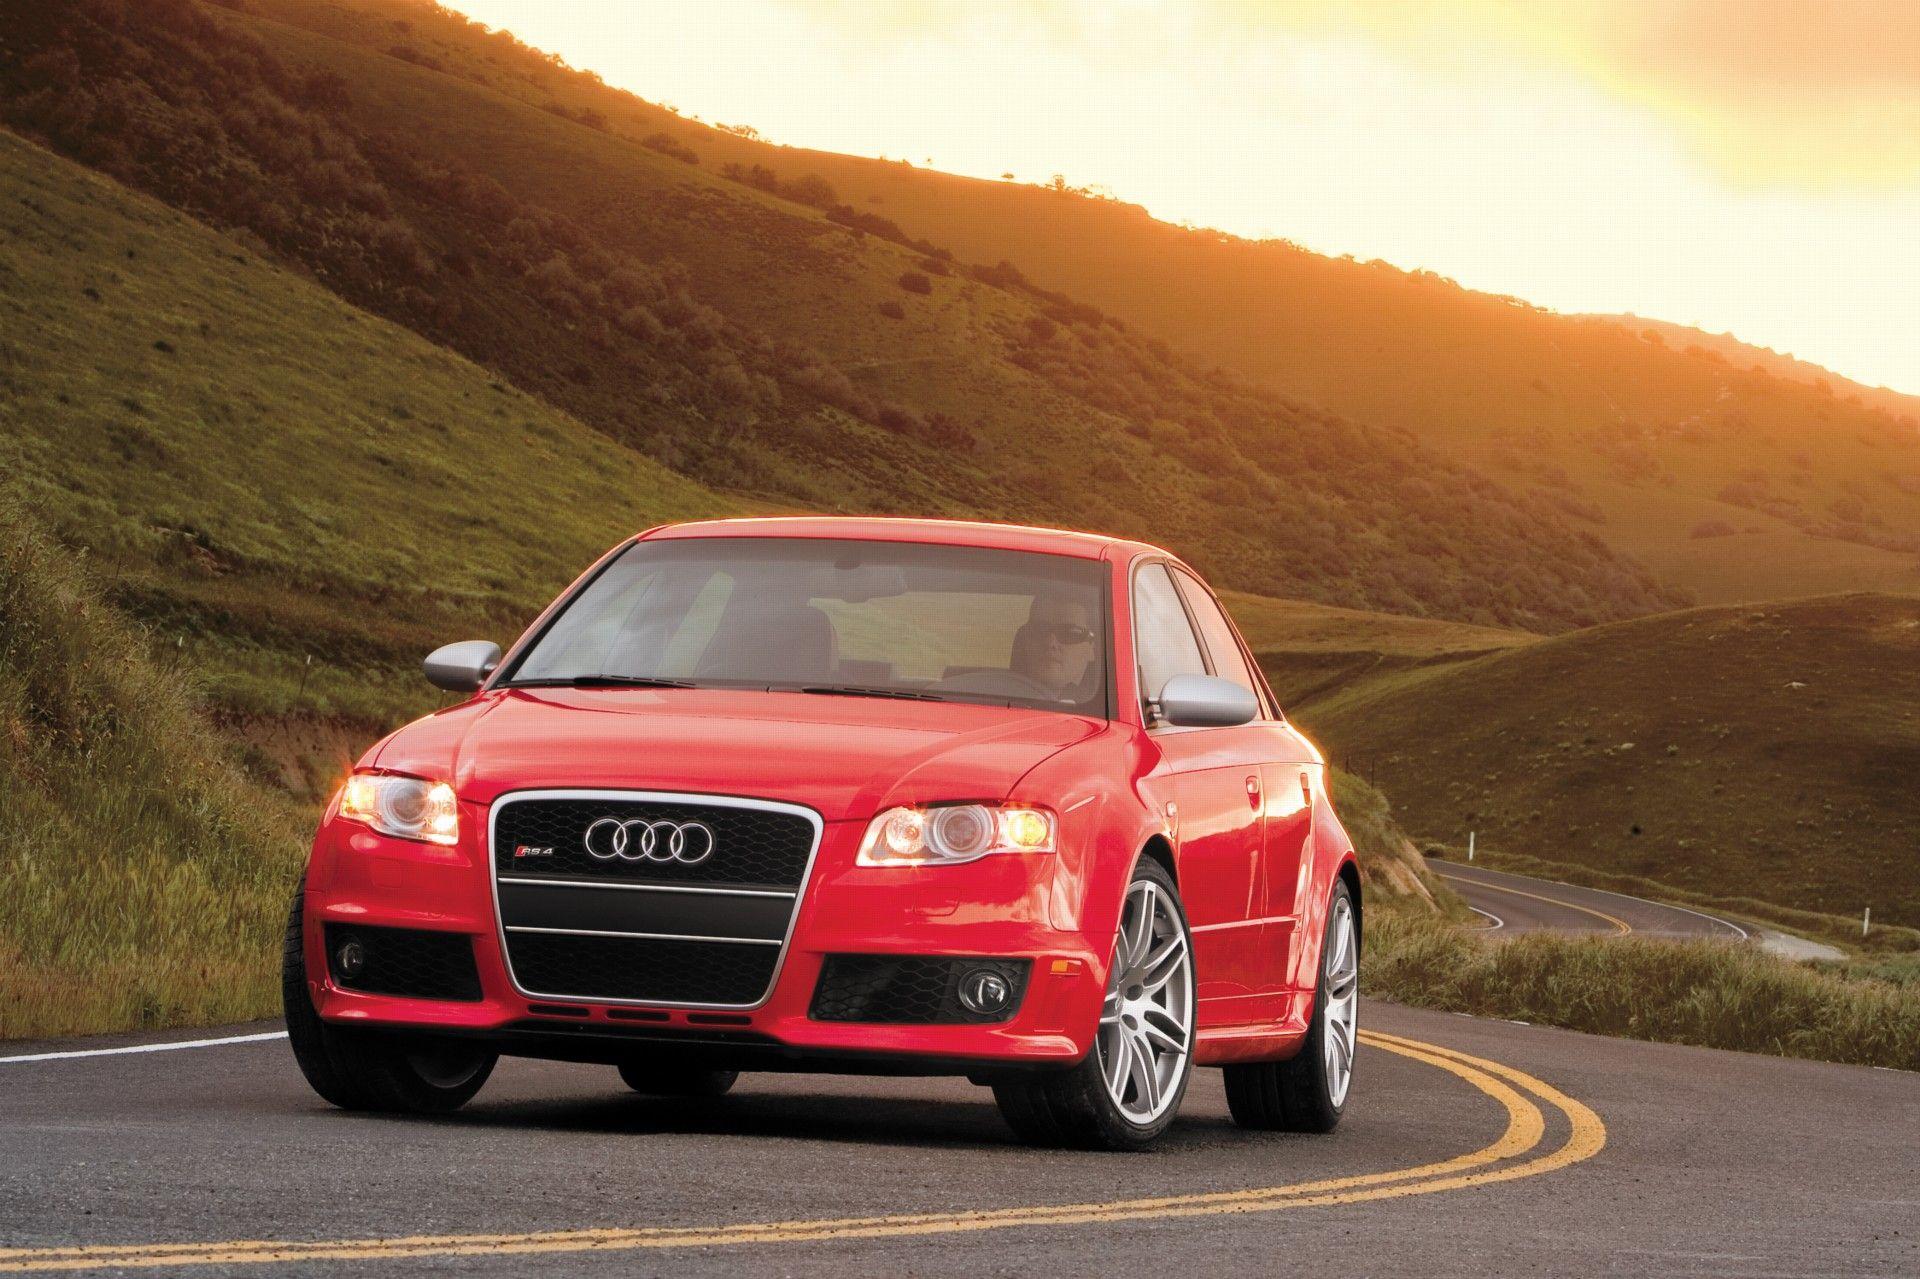 image For > Audi Rs4 Wallpaper